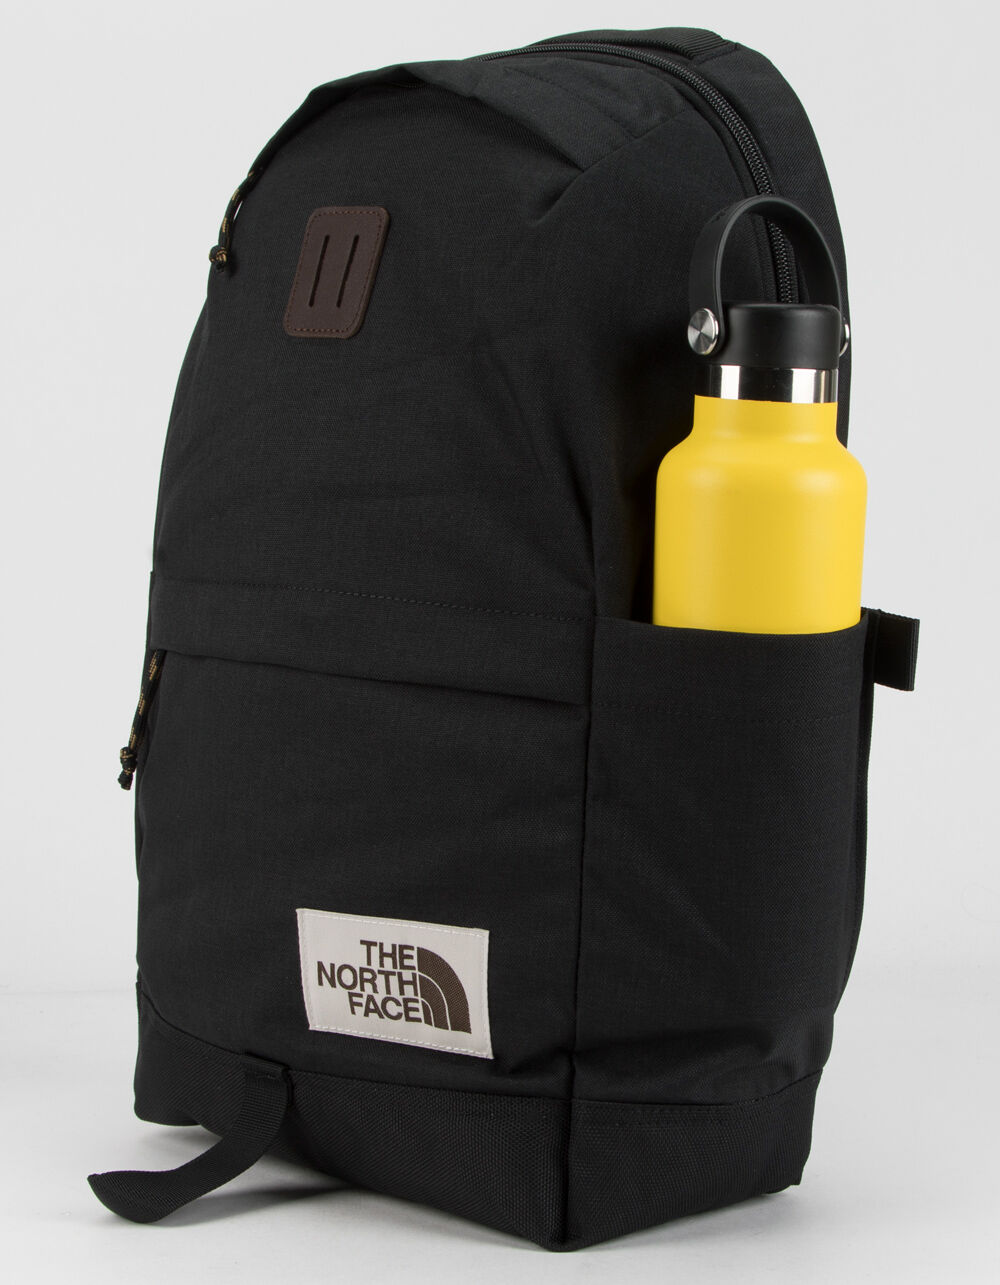 THE NORTH FACE Daypack Black Heather Backpack image number 1